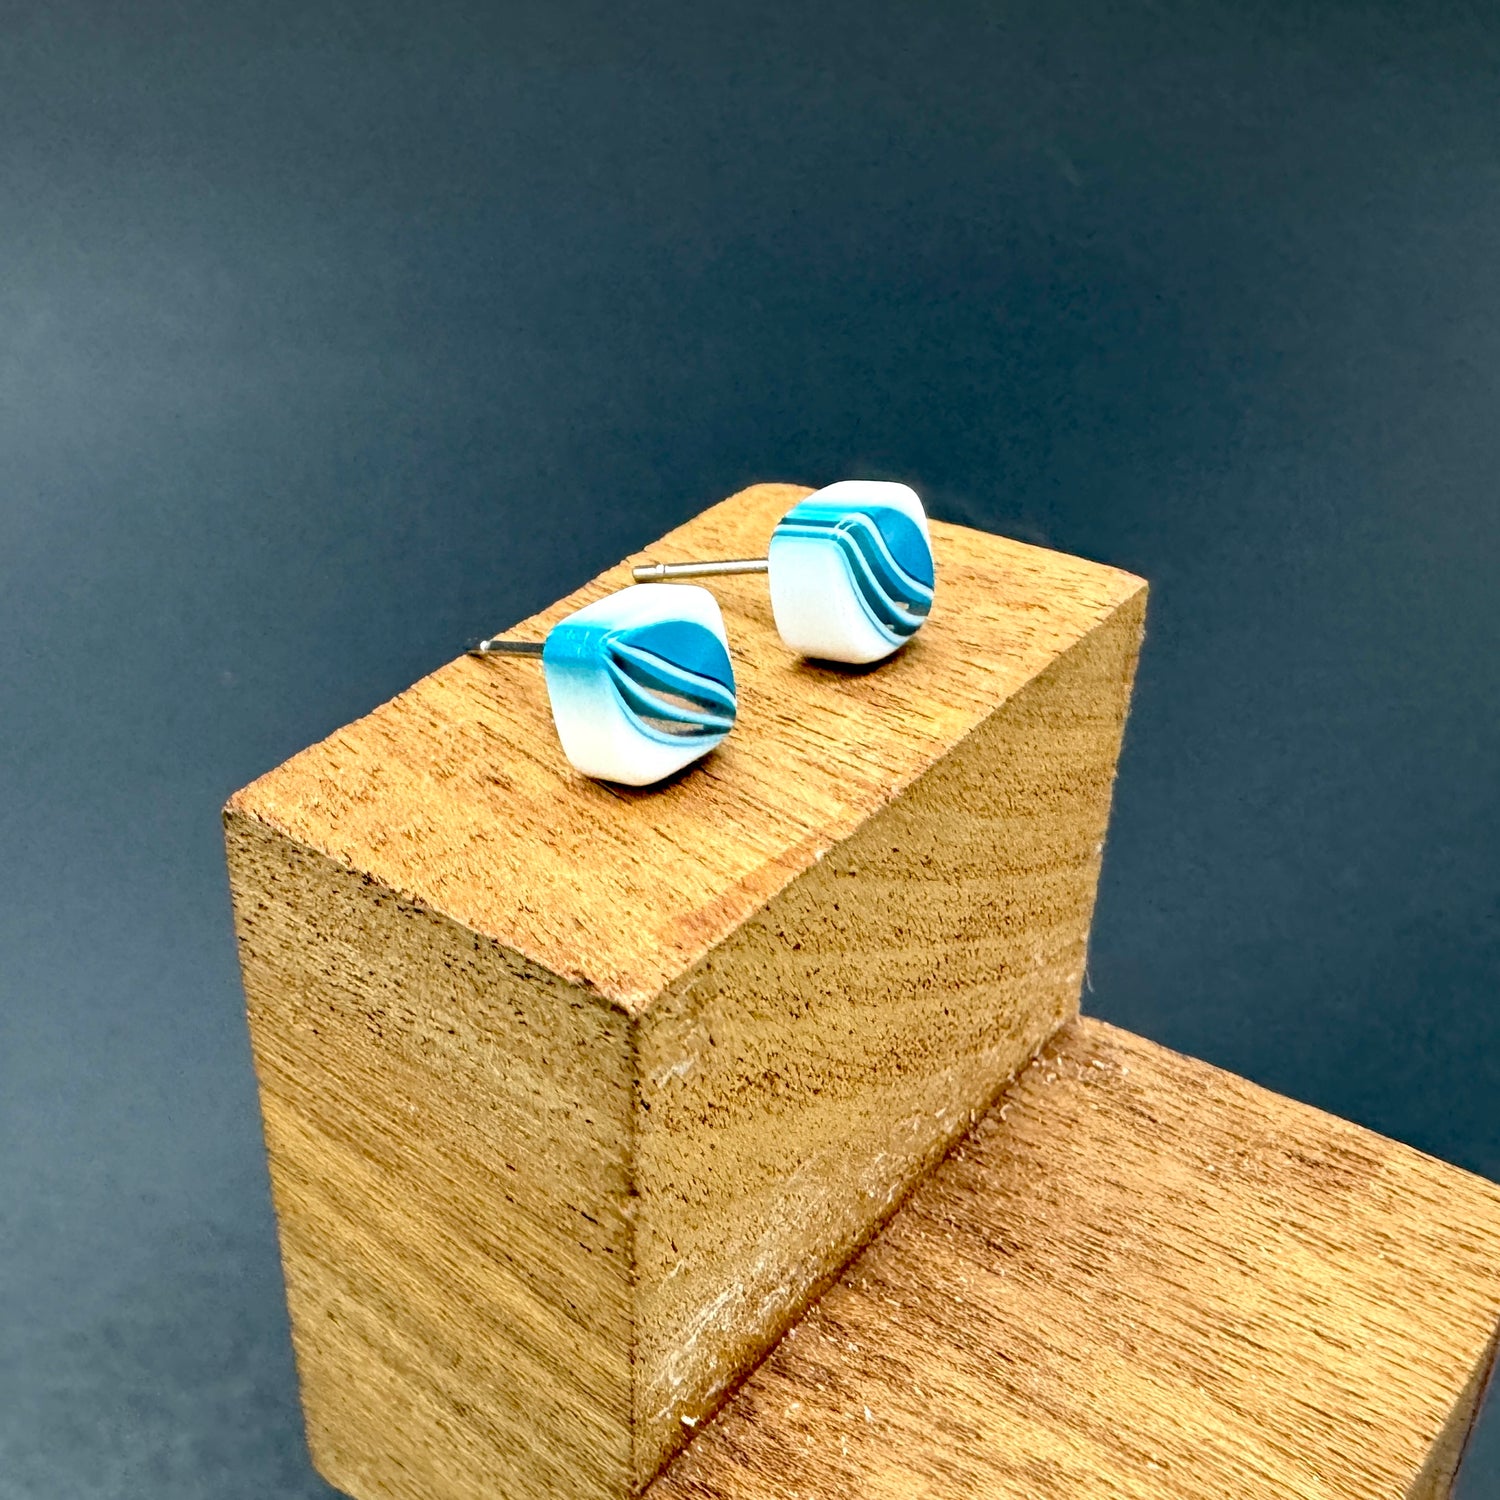 aqua stripe stud earrings made with vintage lucite 